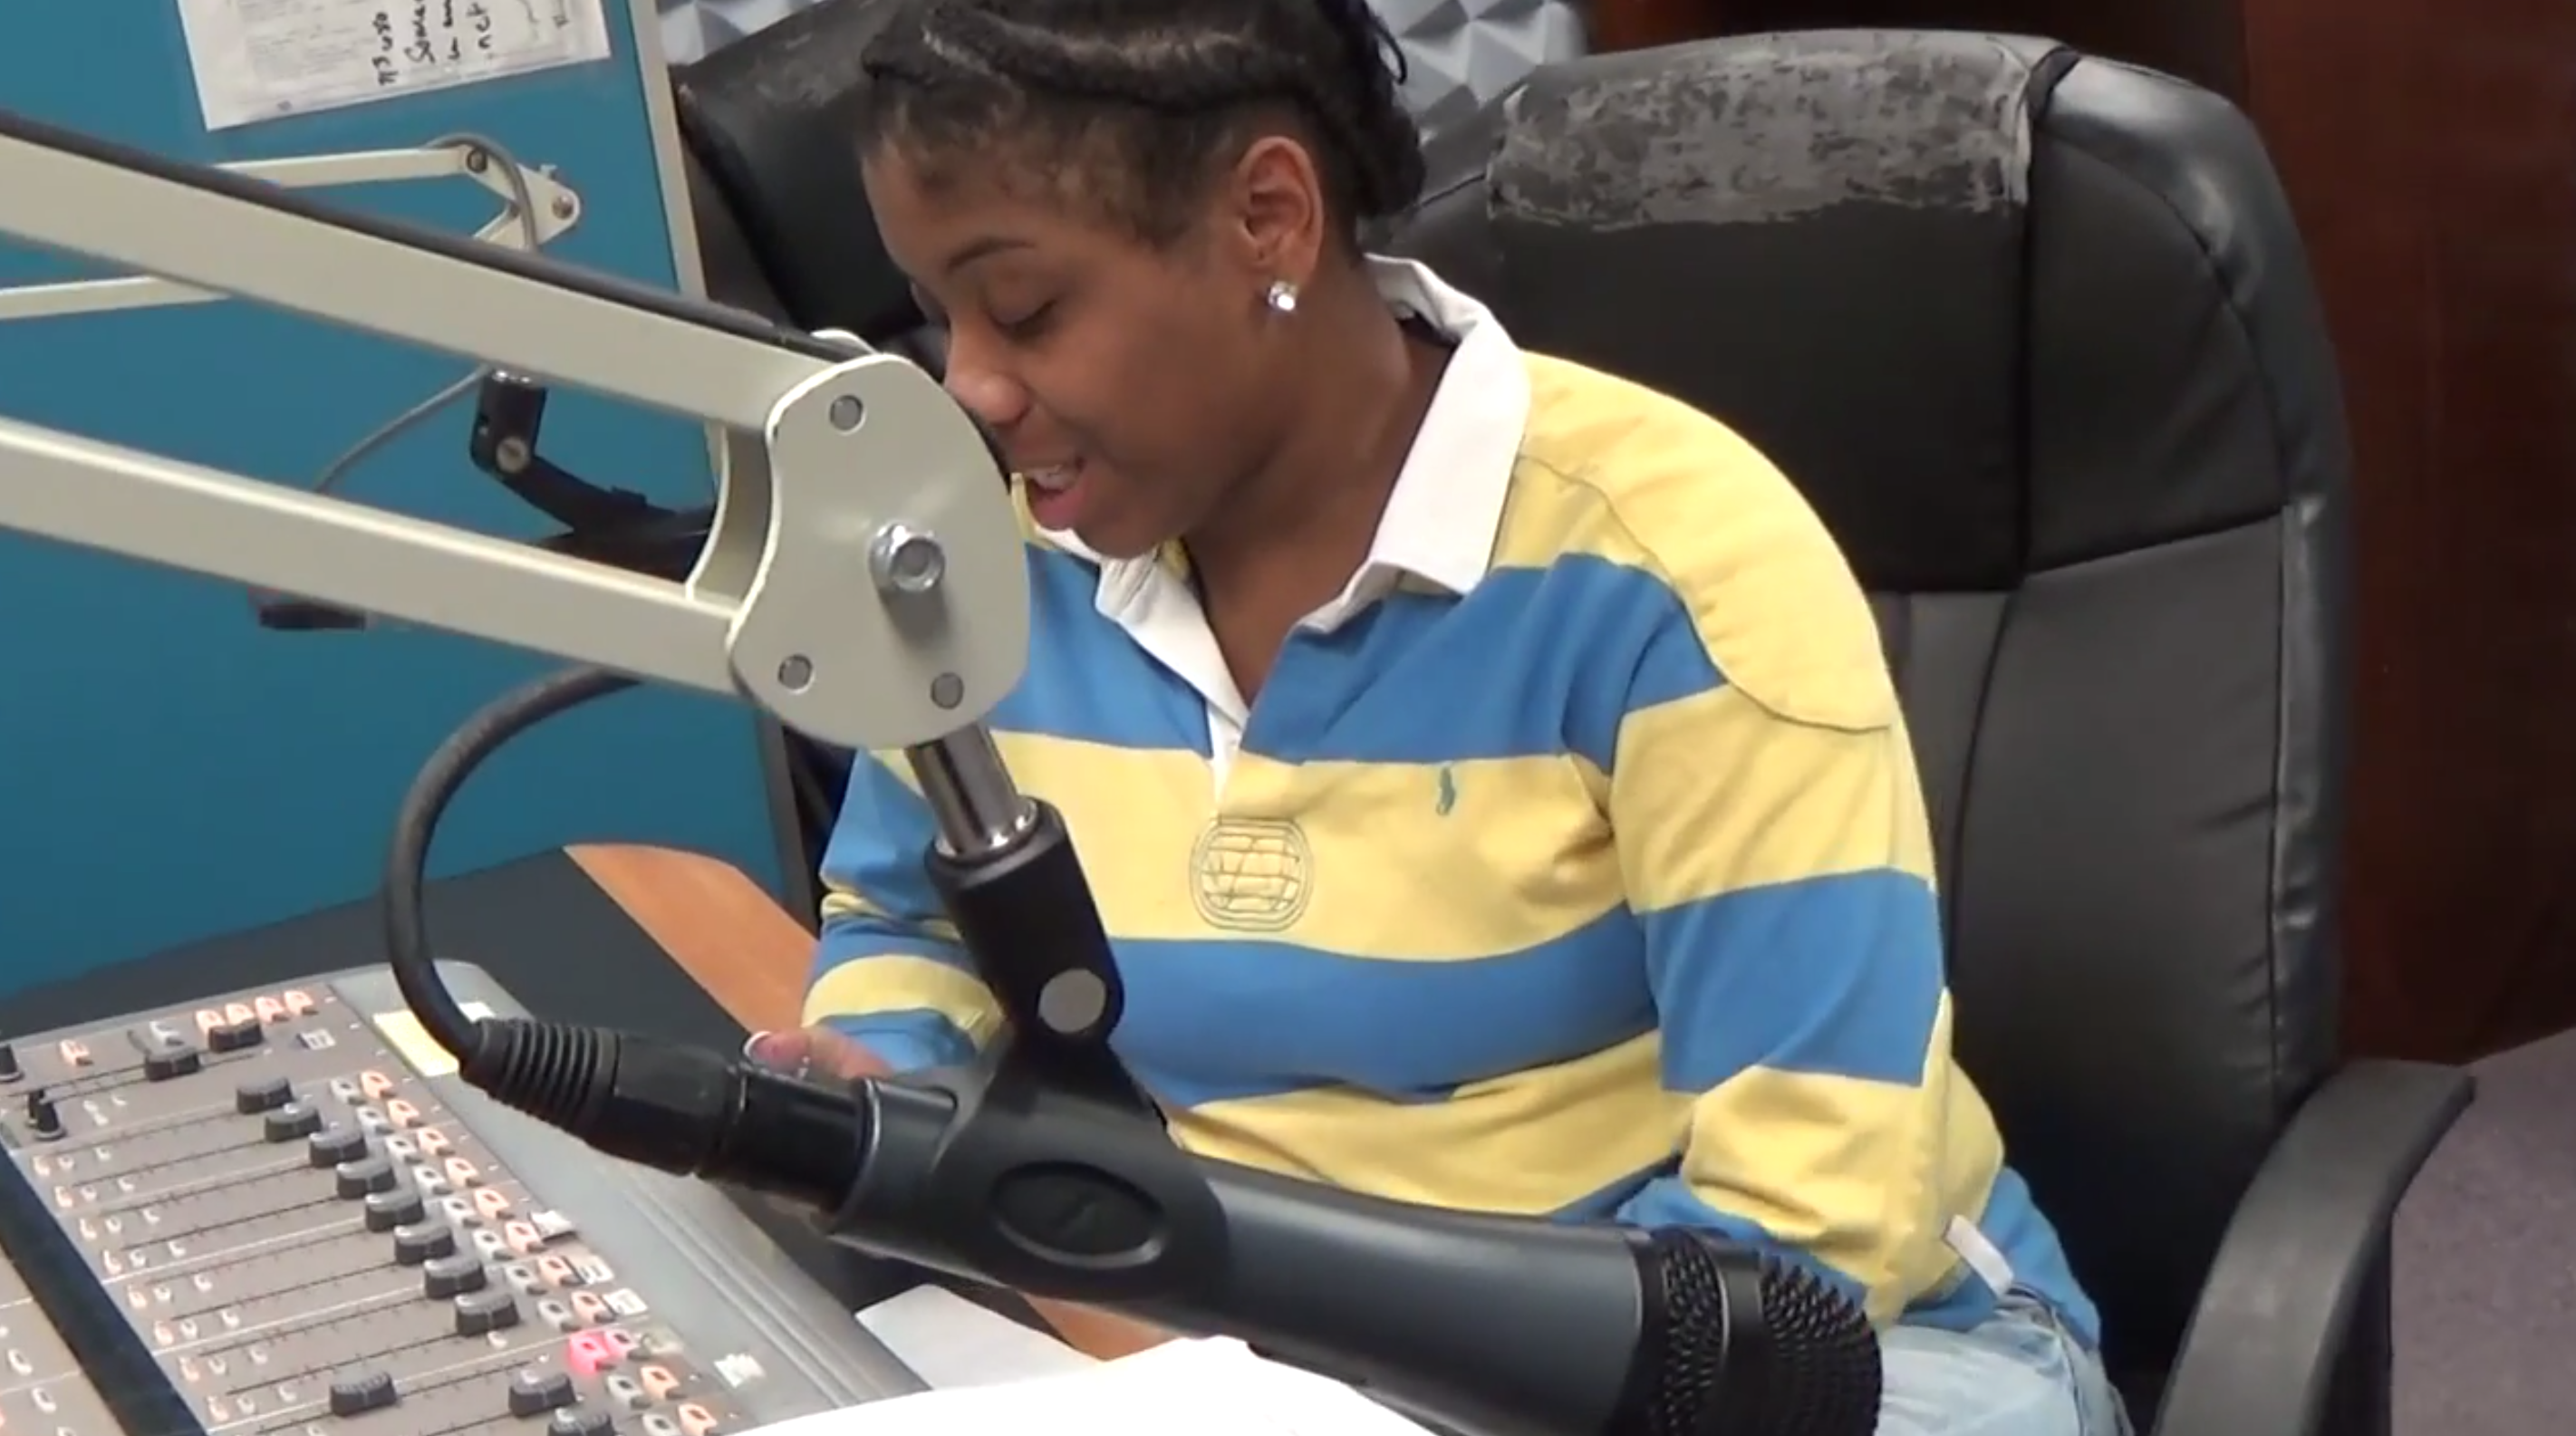 DJ Tricia B With Her Show ‘The Bee Talk Show’ on WPRL 91.7 FM